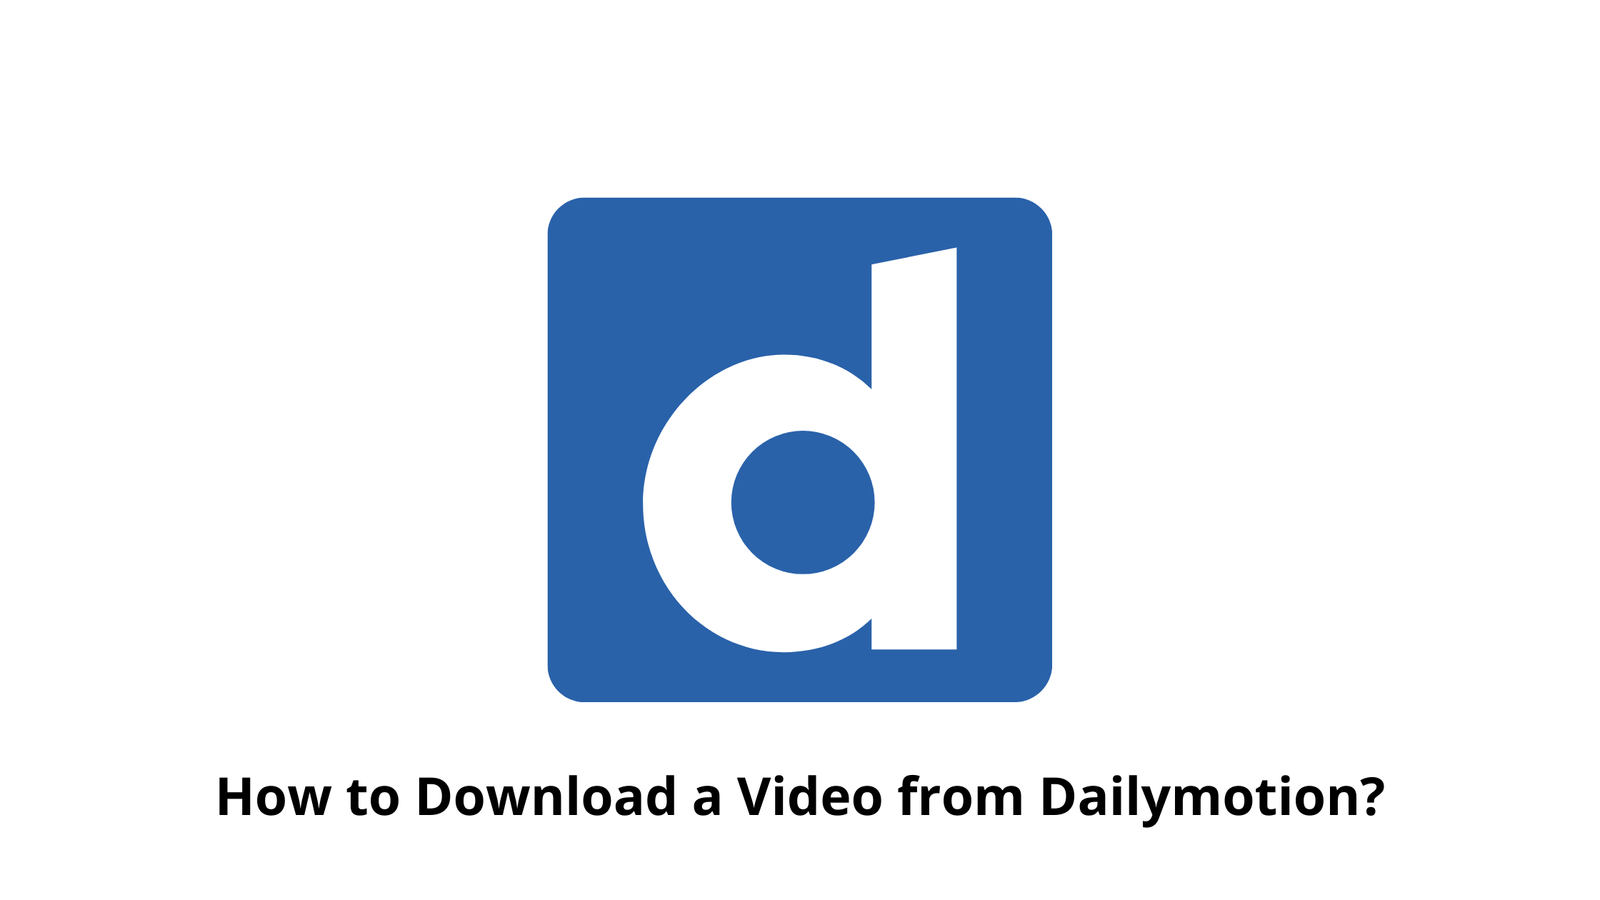 How to Download a Video from Dailymotion?